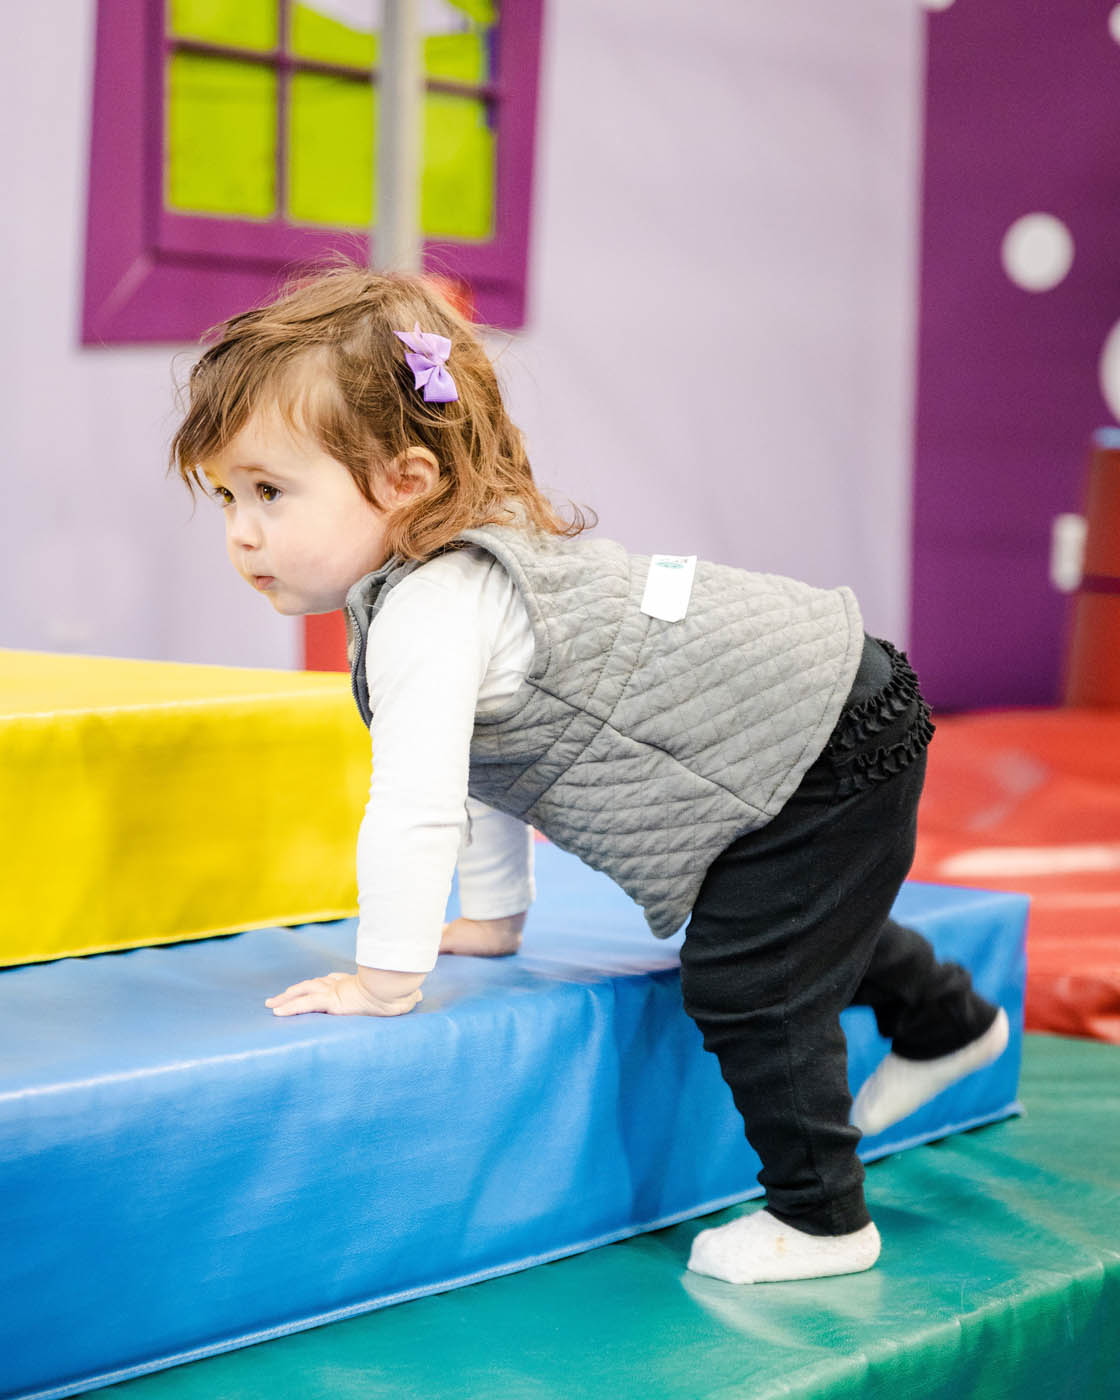 A little girl climbing on soft tumbling equipment for toddlers at Romp n' Roll in Raleigh, NC.